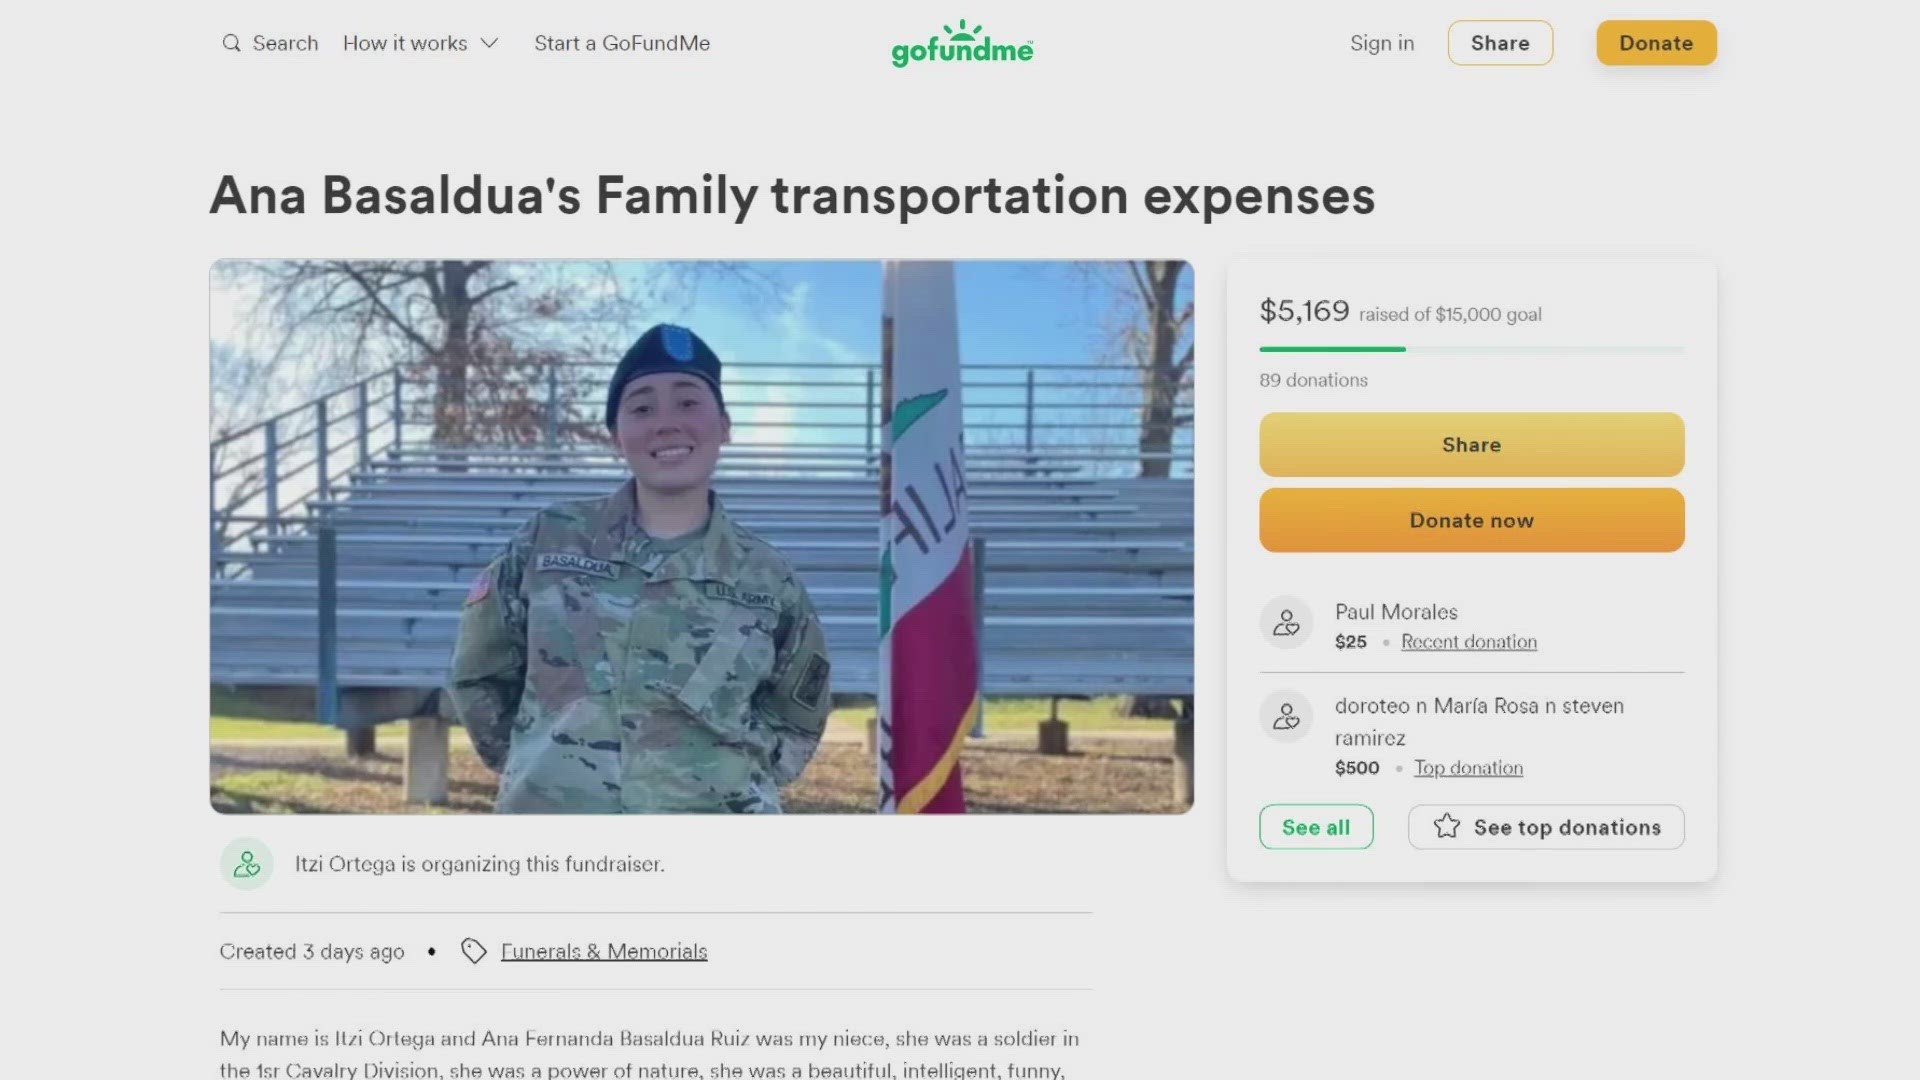 The money raised would help Basaldua Ruiz's mother and sister travel from Mexico to the United States to attend her memorial for a final goodbye.